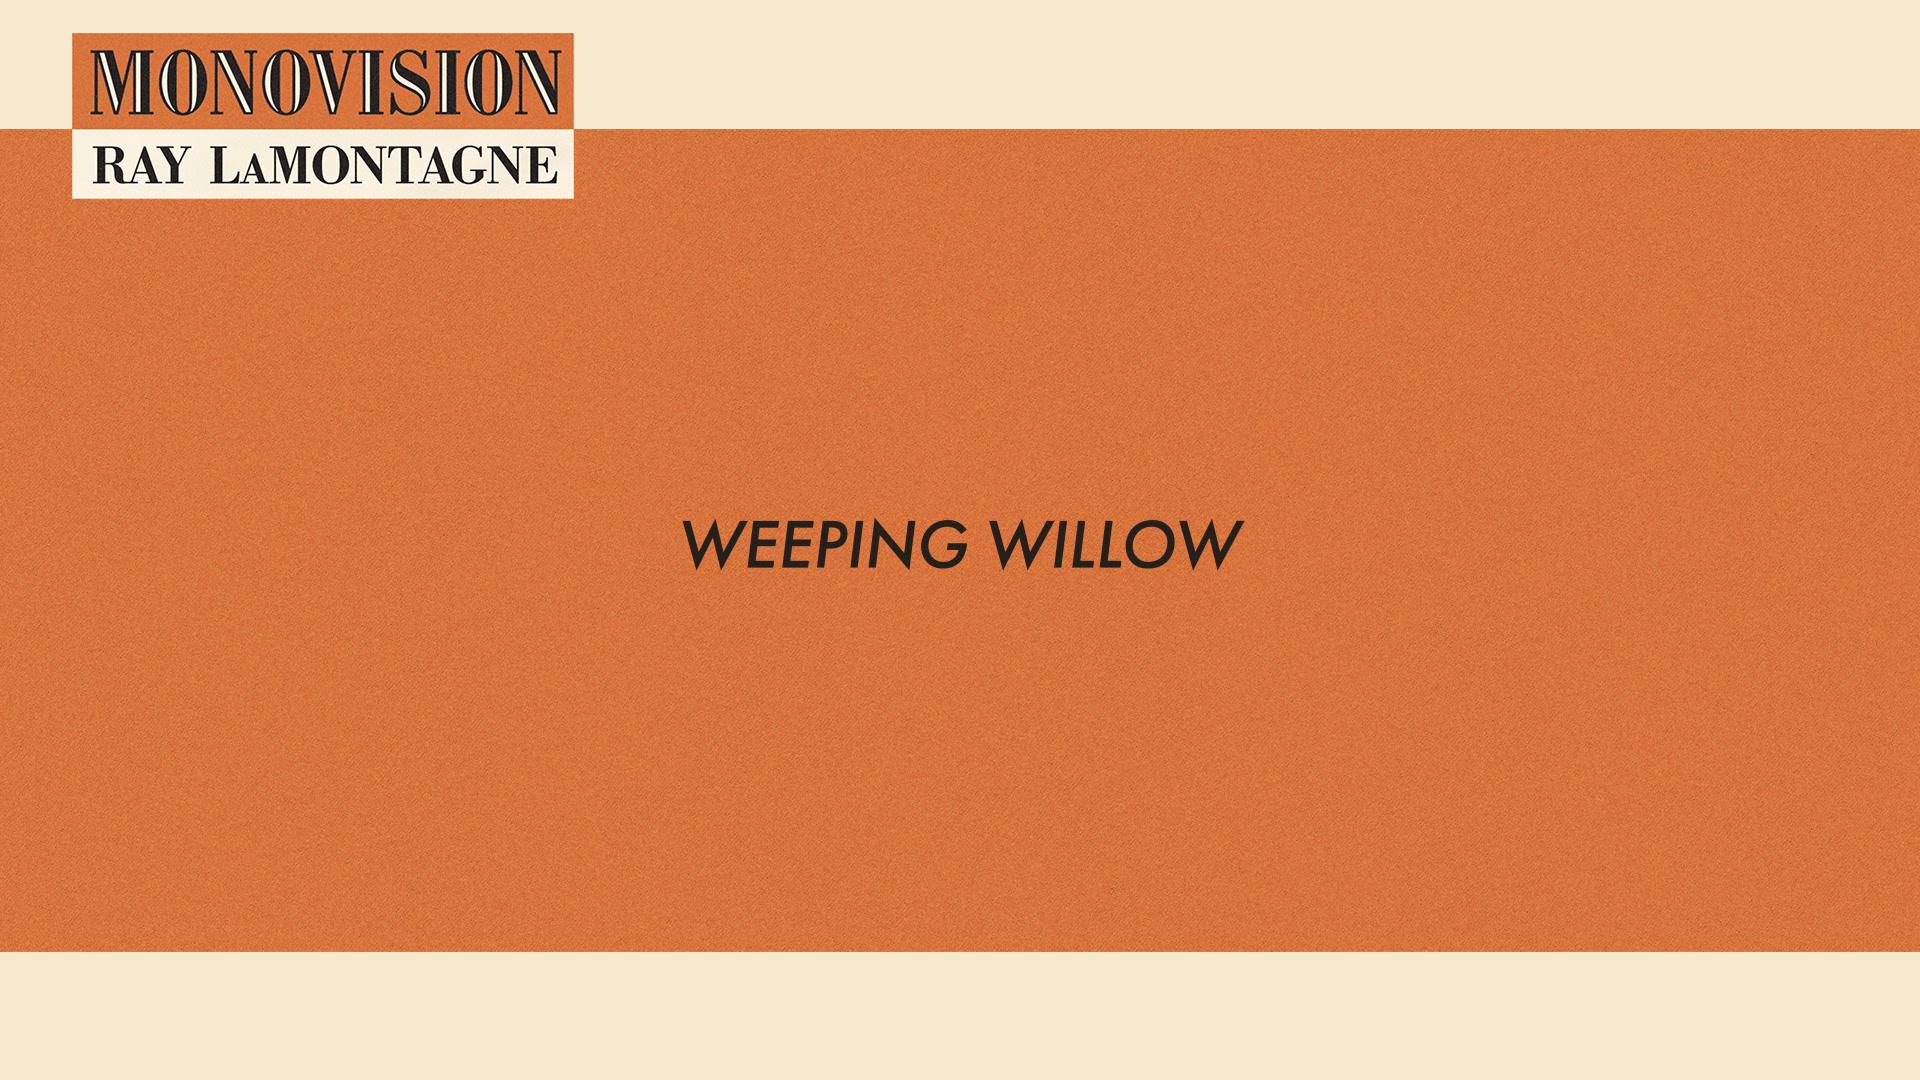 Ray LaMontagne - Weeping Willow (Lyric Video)